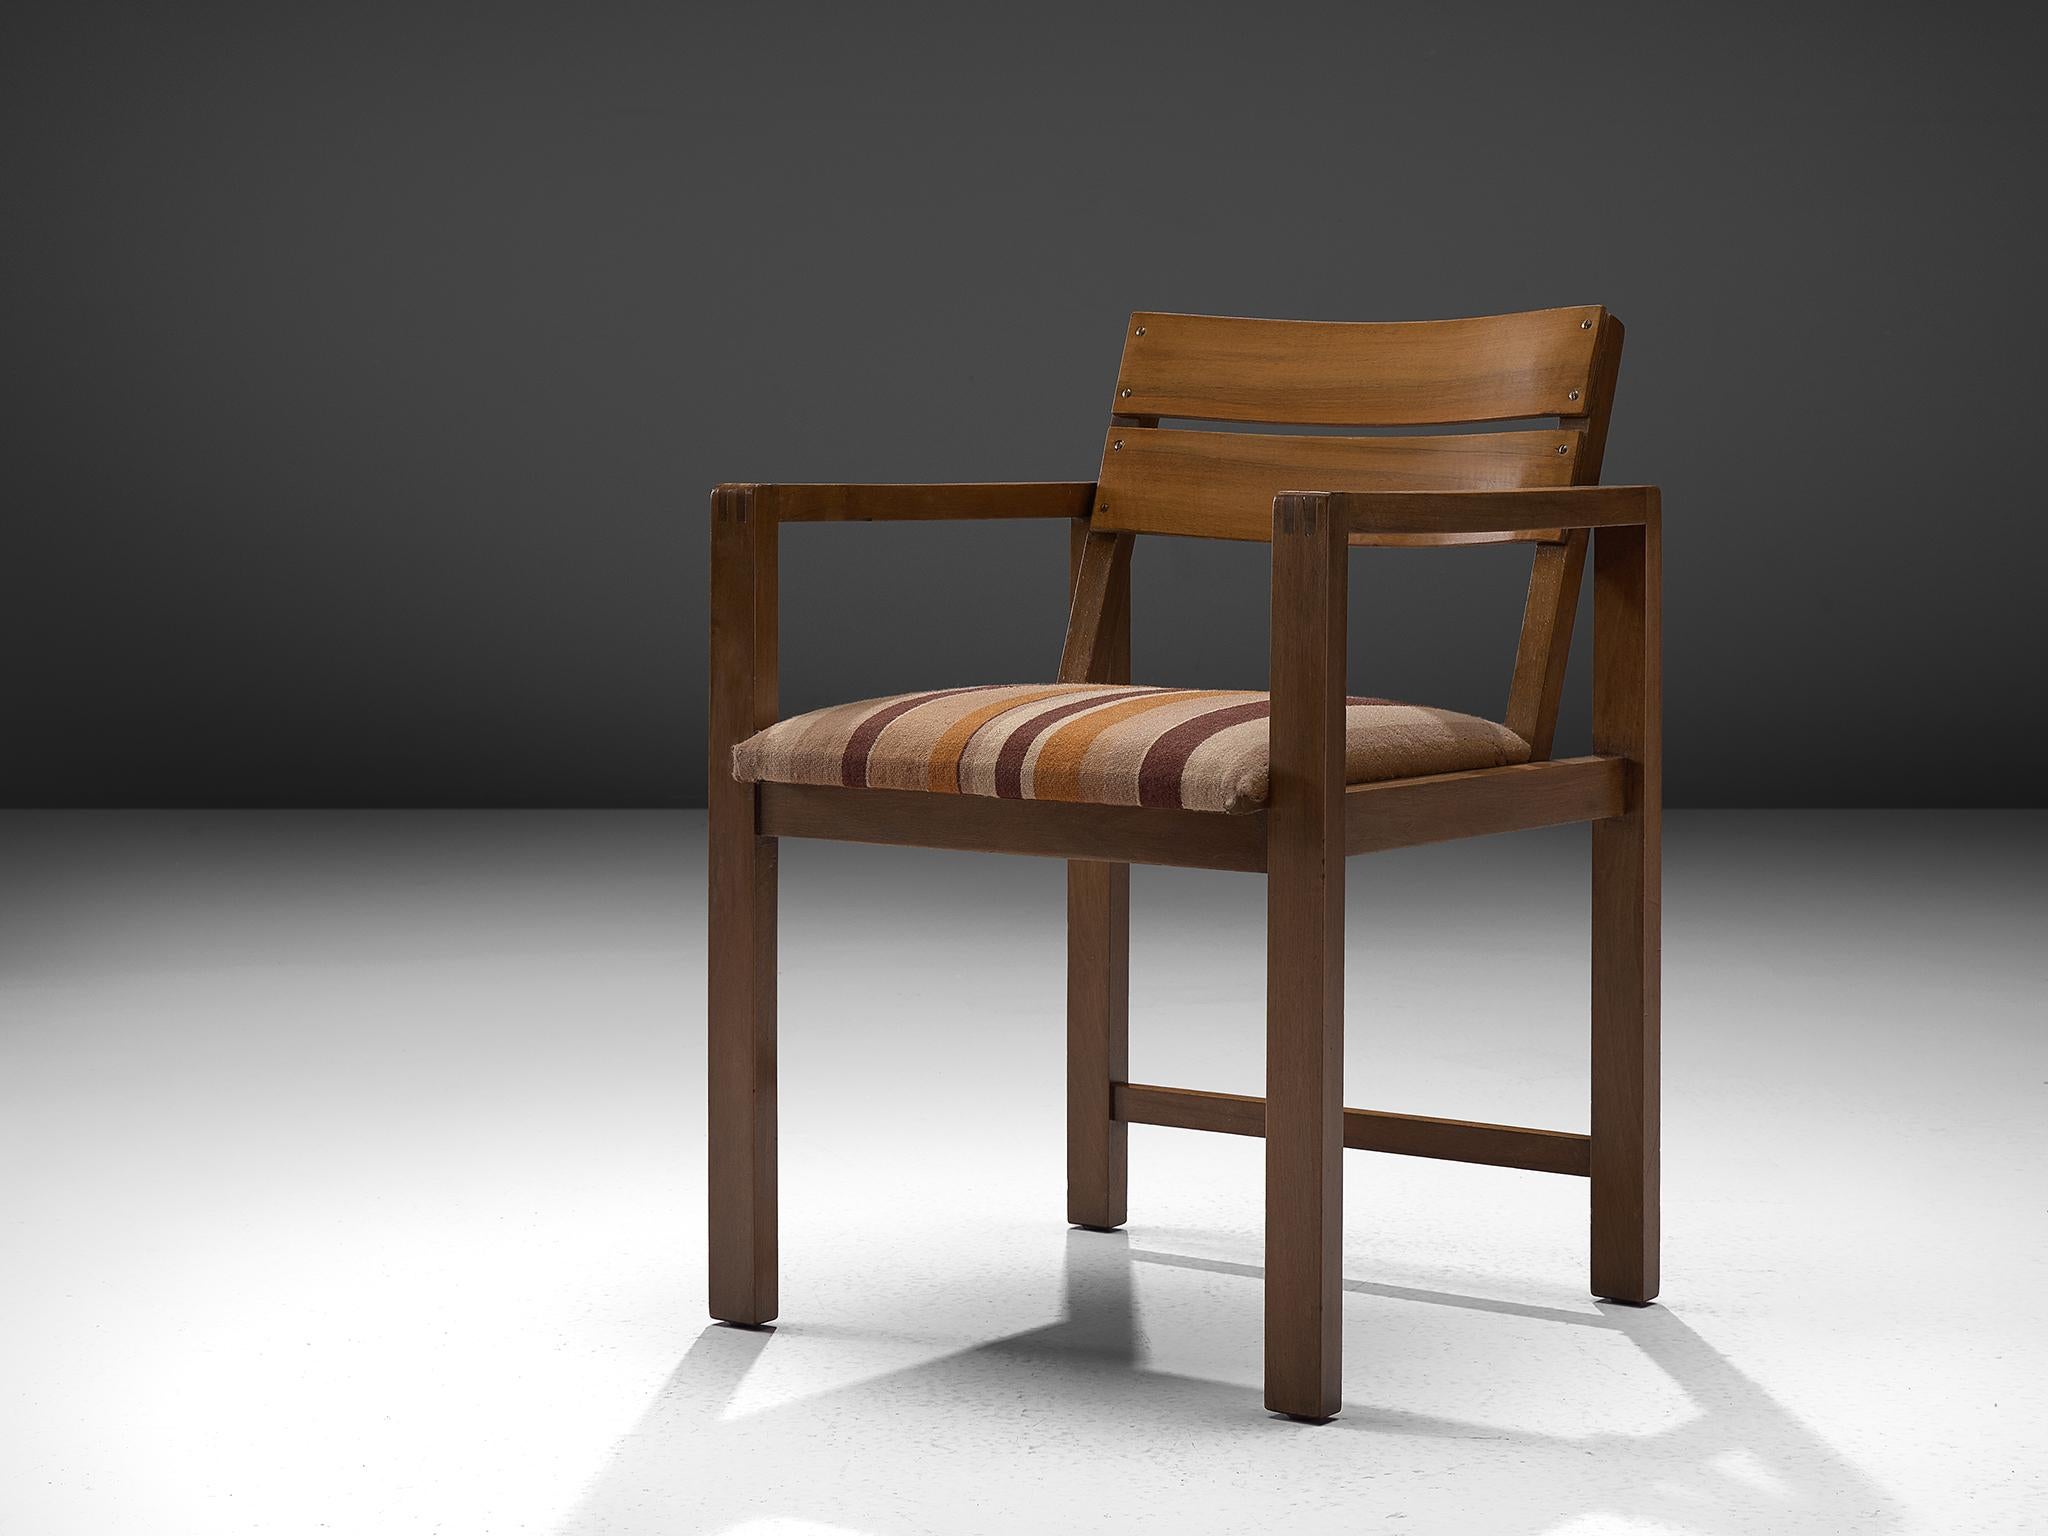 Erich Dieckmann, Bauhaus armchair model M42, walnut and fabric, Germany, 1930s

This is a rare Bauhaus armchair by the German designer Erich Dieckmann created in the 1930s. It's composed of walnut and fabric. The design features the Bauhaus